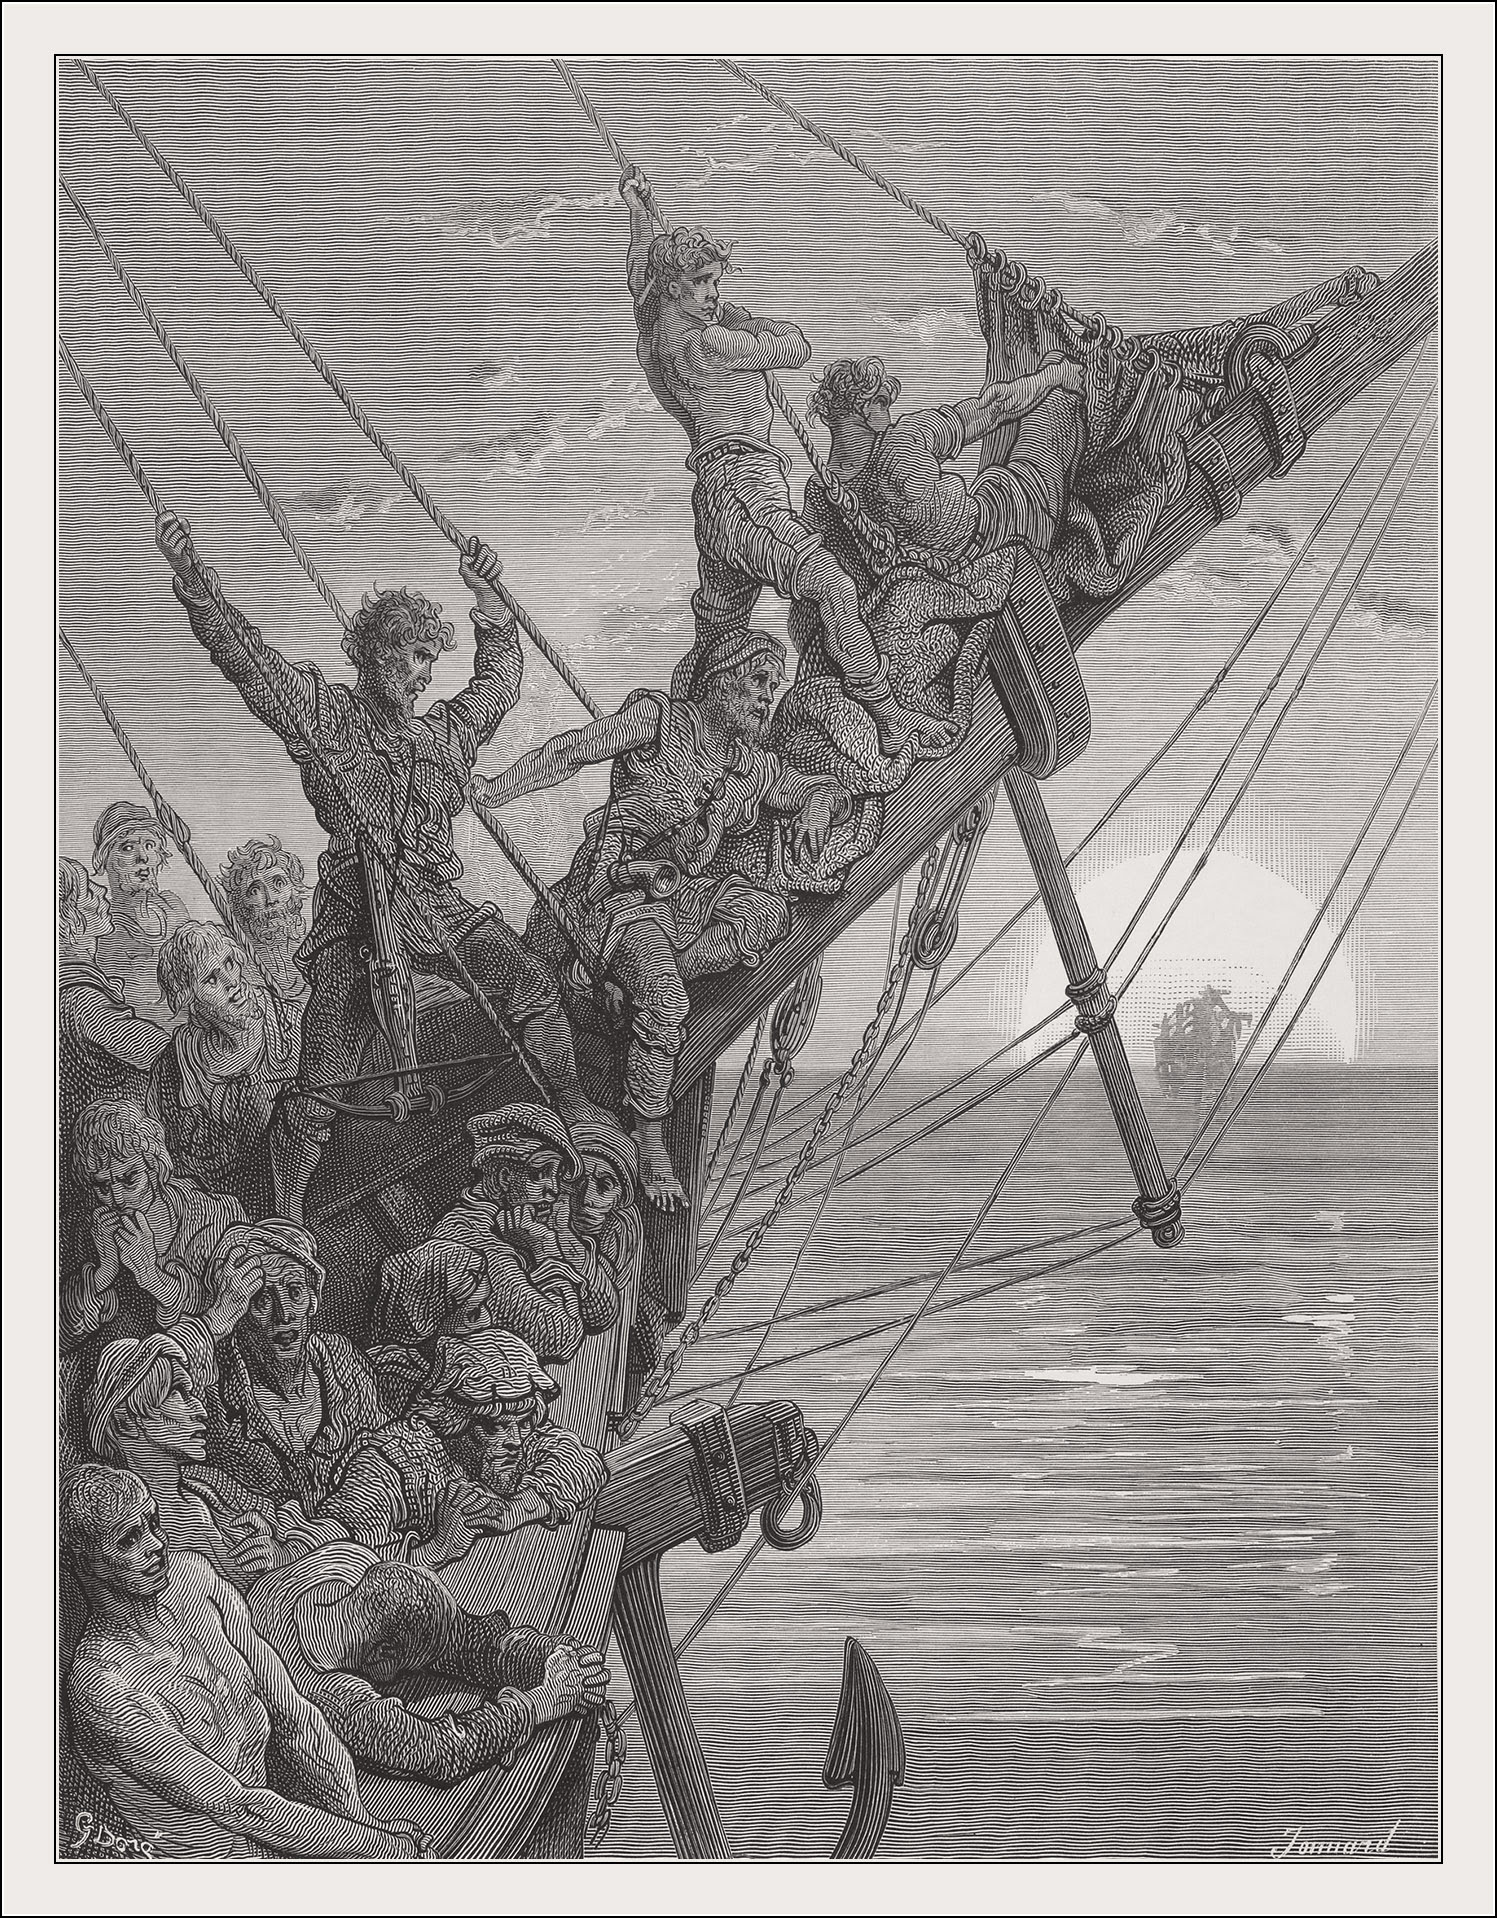 Gustave Doré, Rime of the ancient mariner